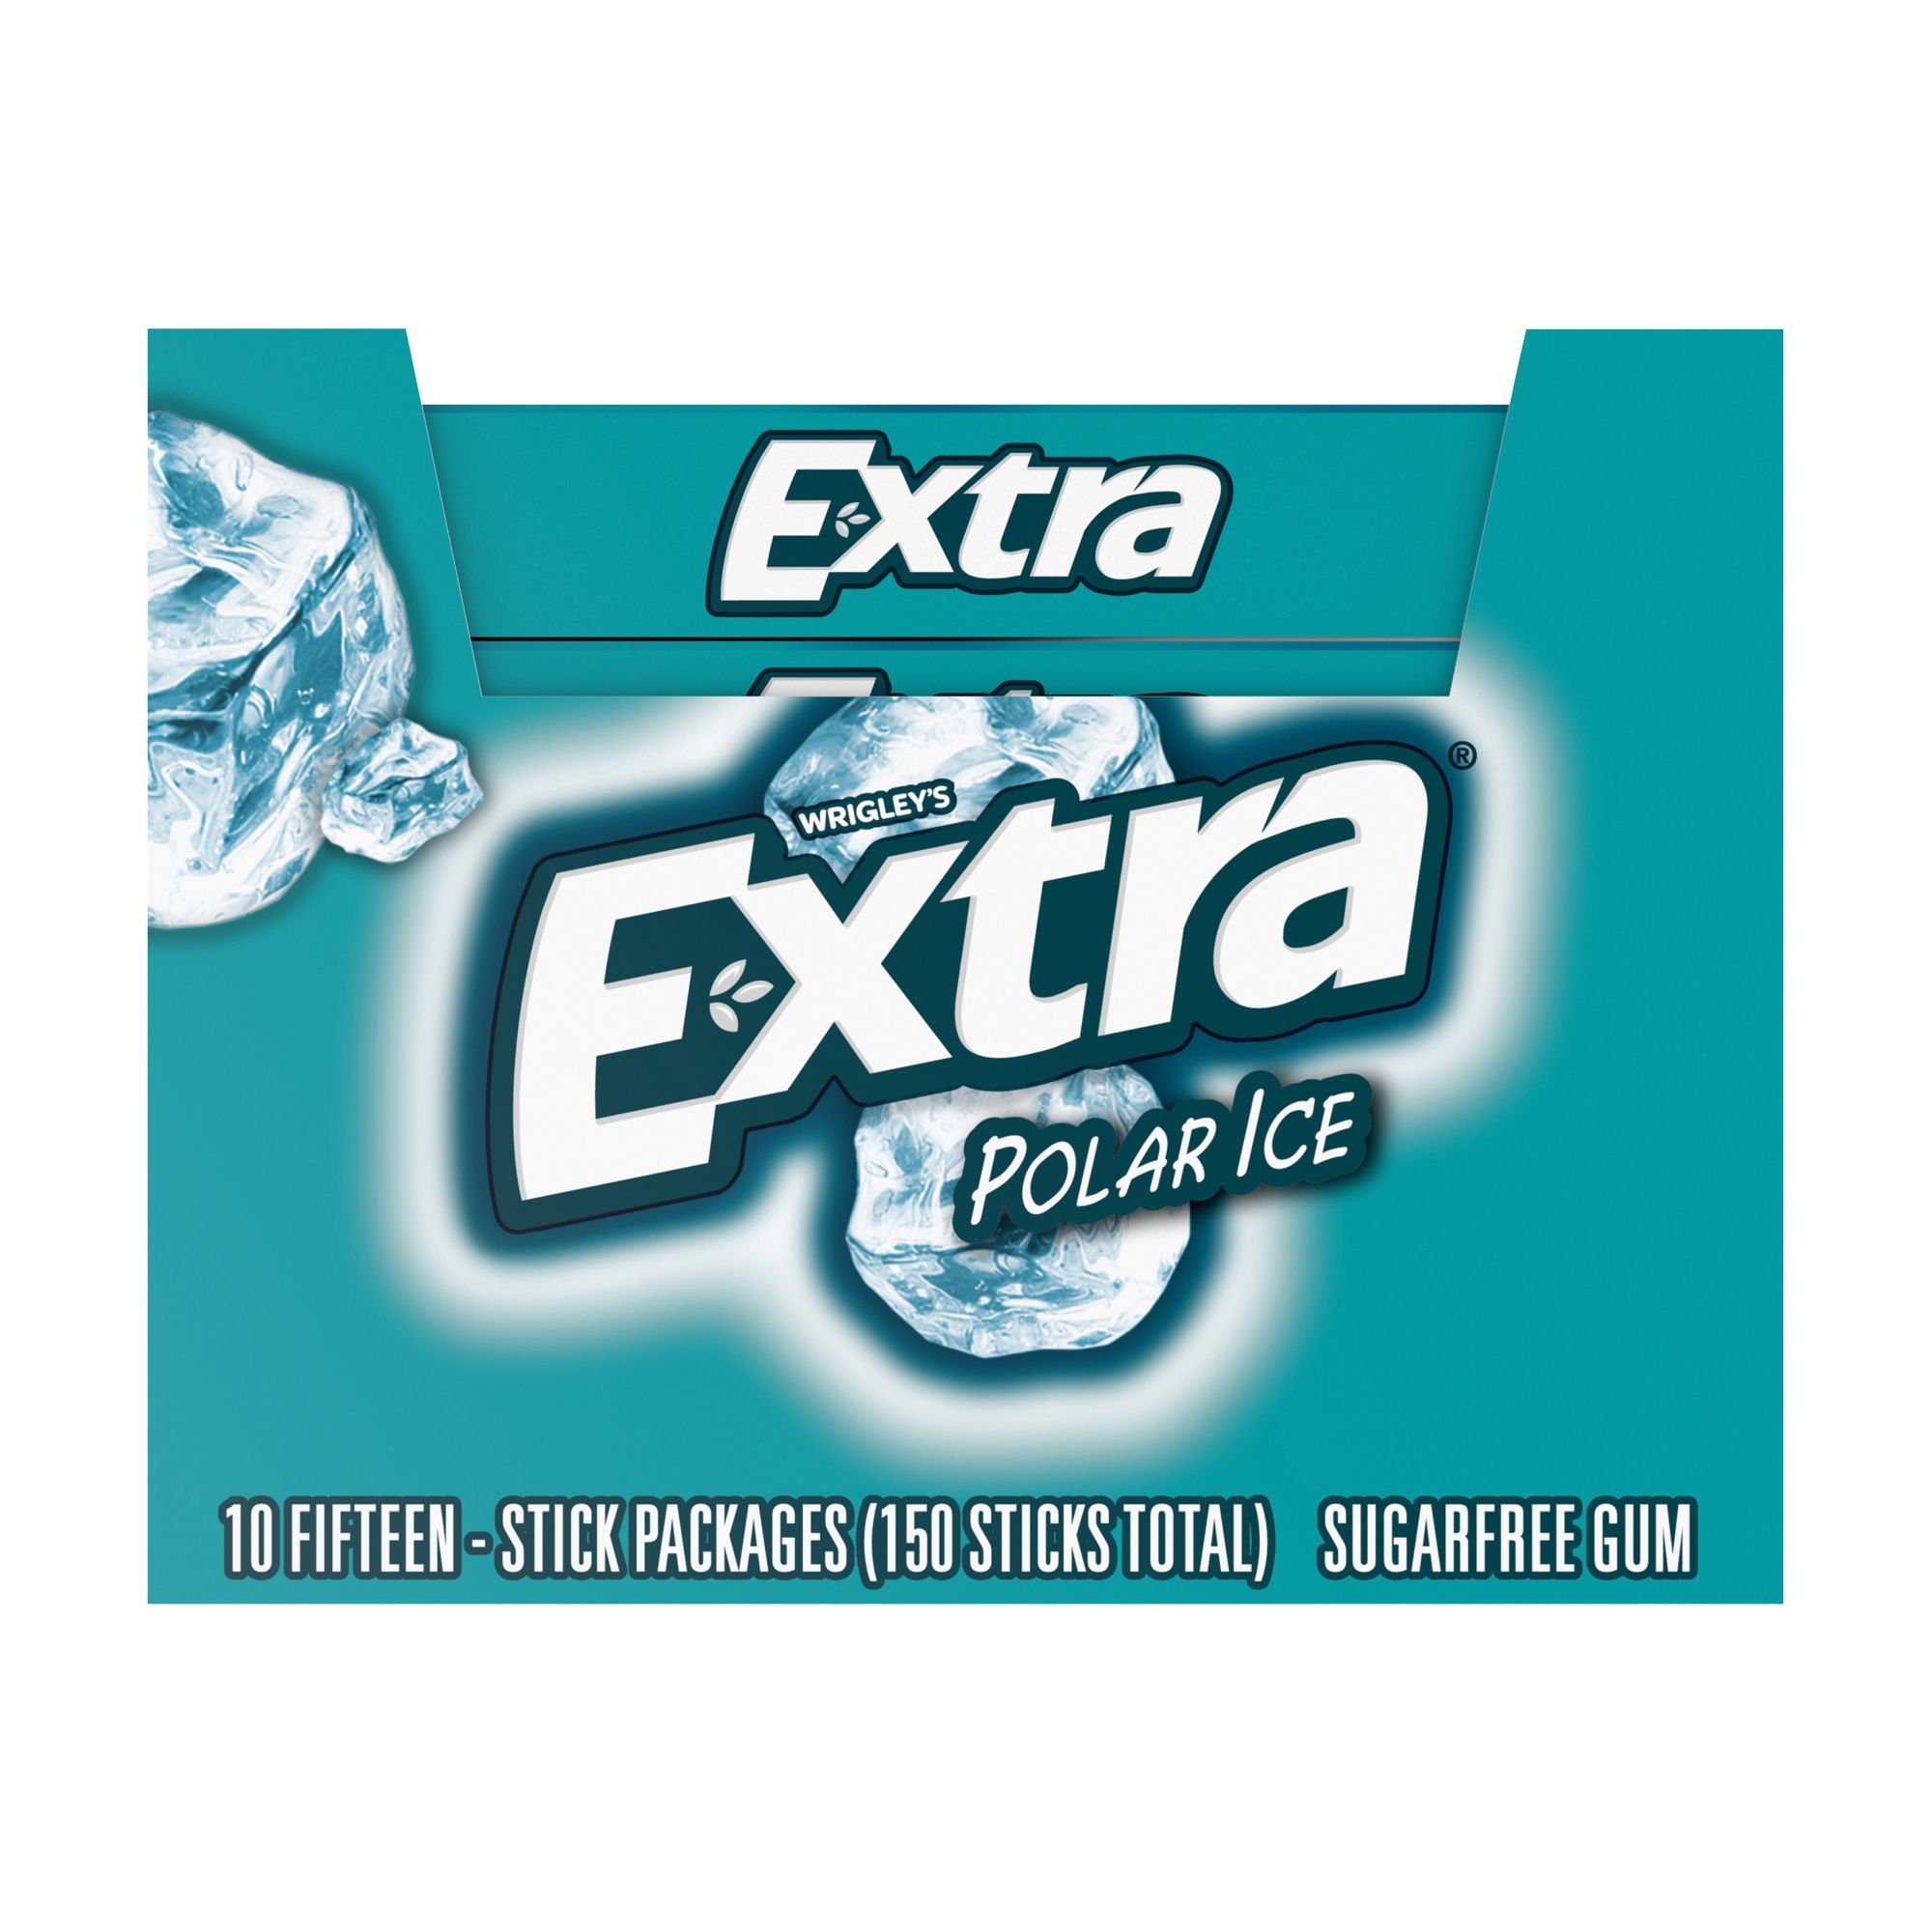 Wrigley's Sugar-free 5 Gum | The Wholesale Candy Shop